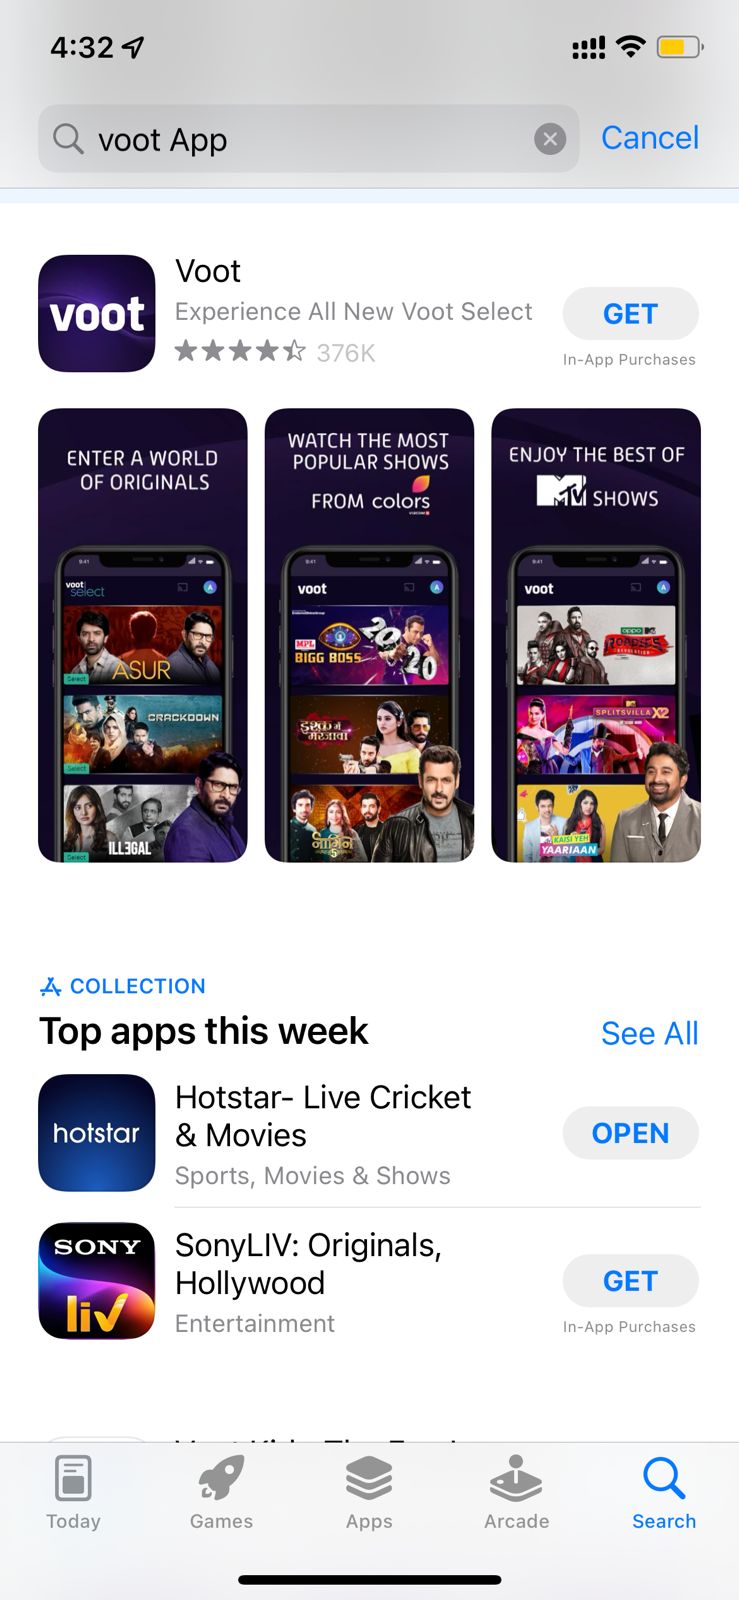 Search for Voot App on Apple Store from the iPhone